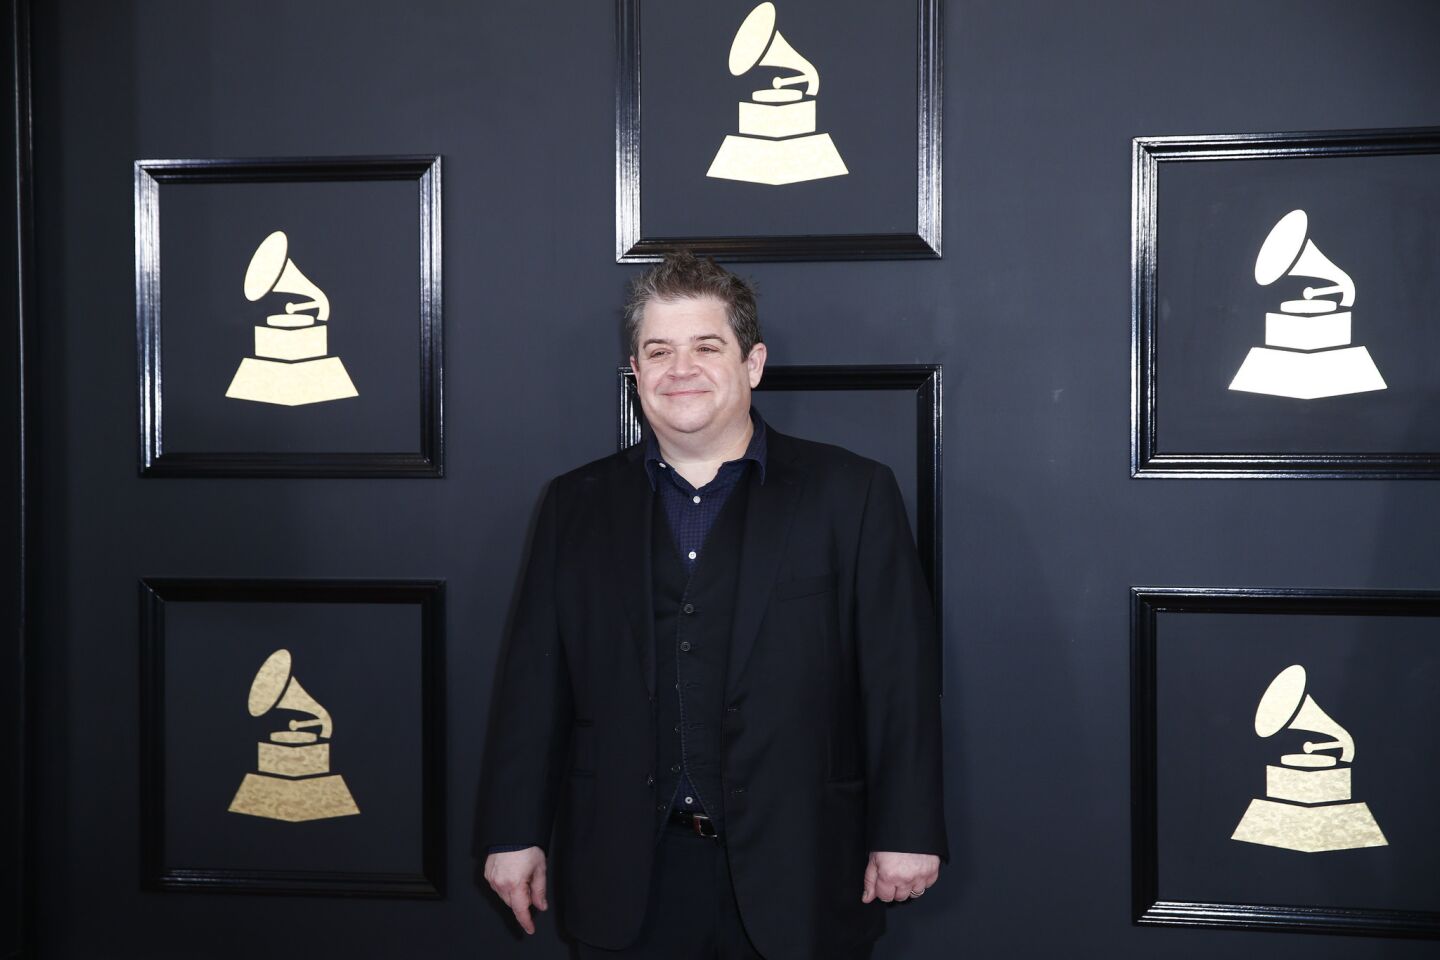 Patton Oswalt arrives at the 59th Grammy Awards.